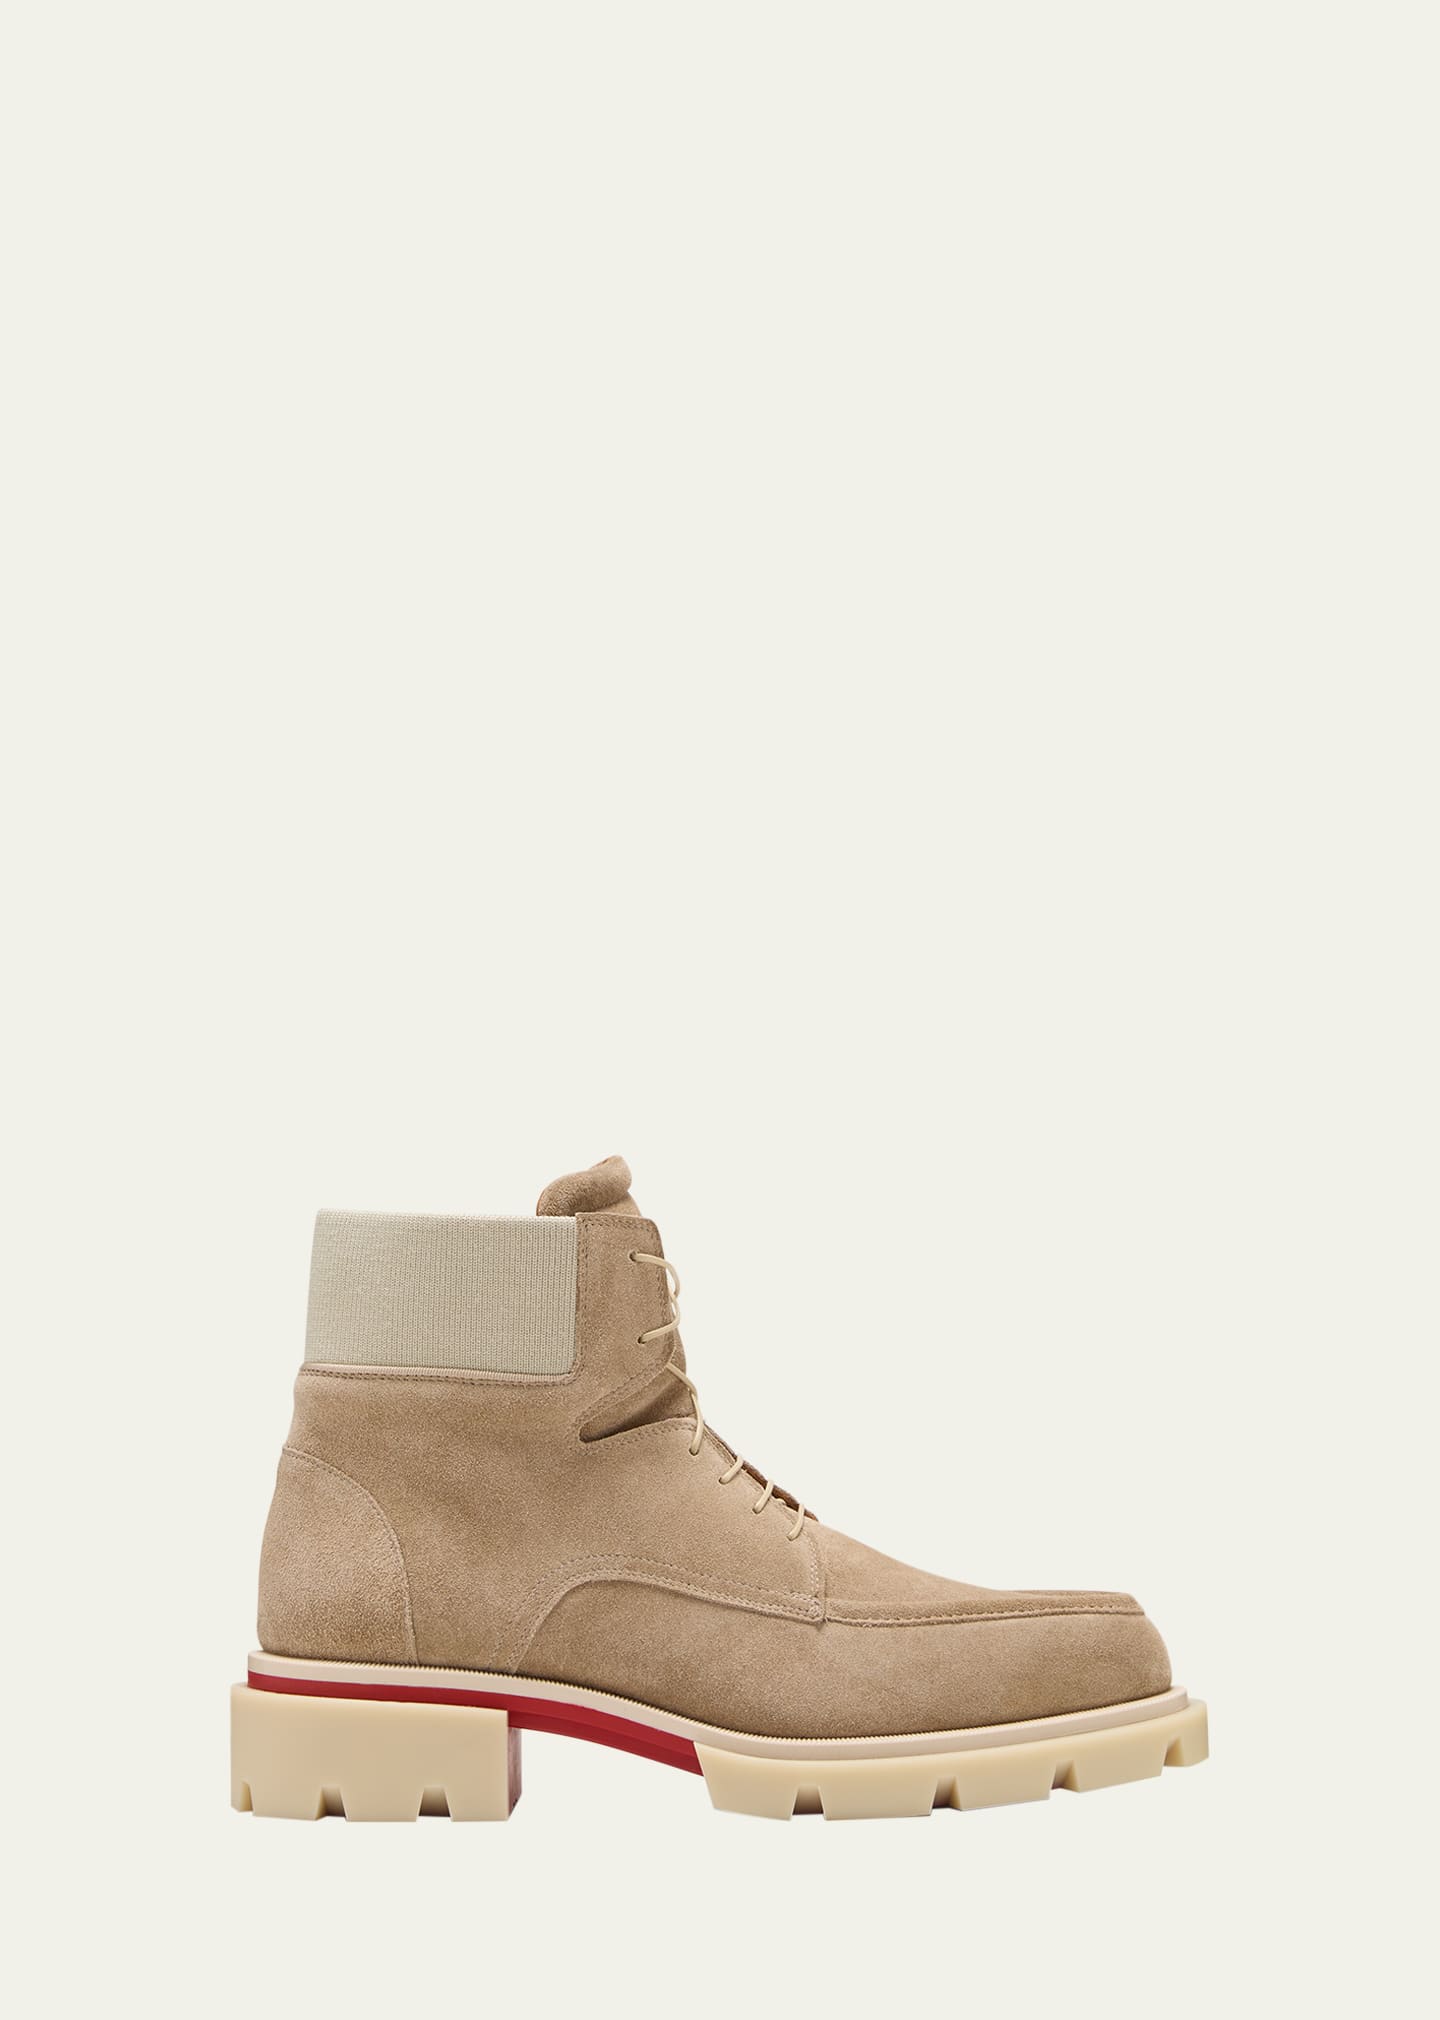 Shop Christian Louboutin Men's Our Walk Suede Lace-up Boots In Saharienne